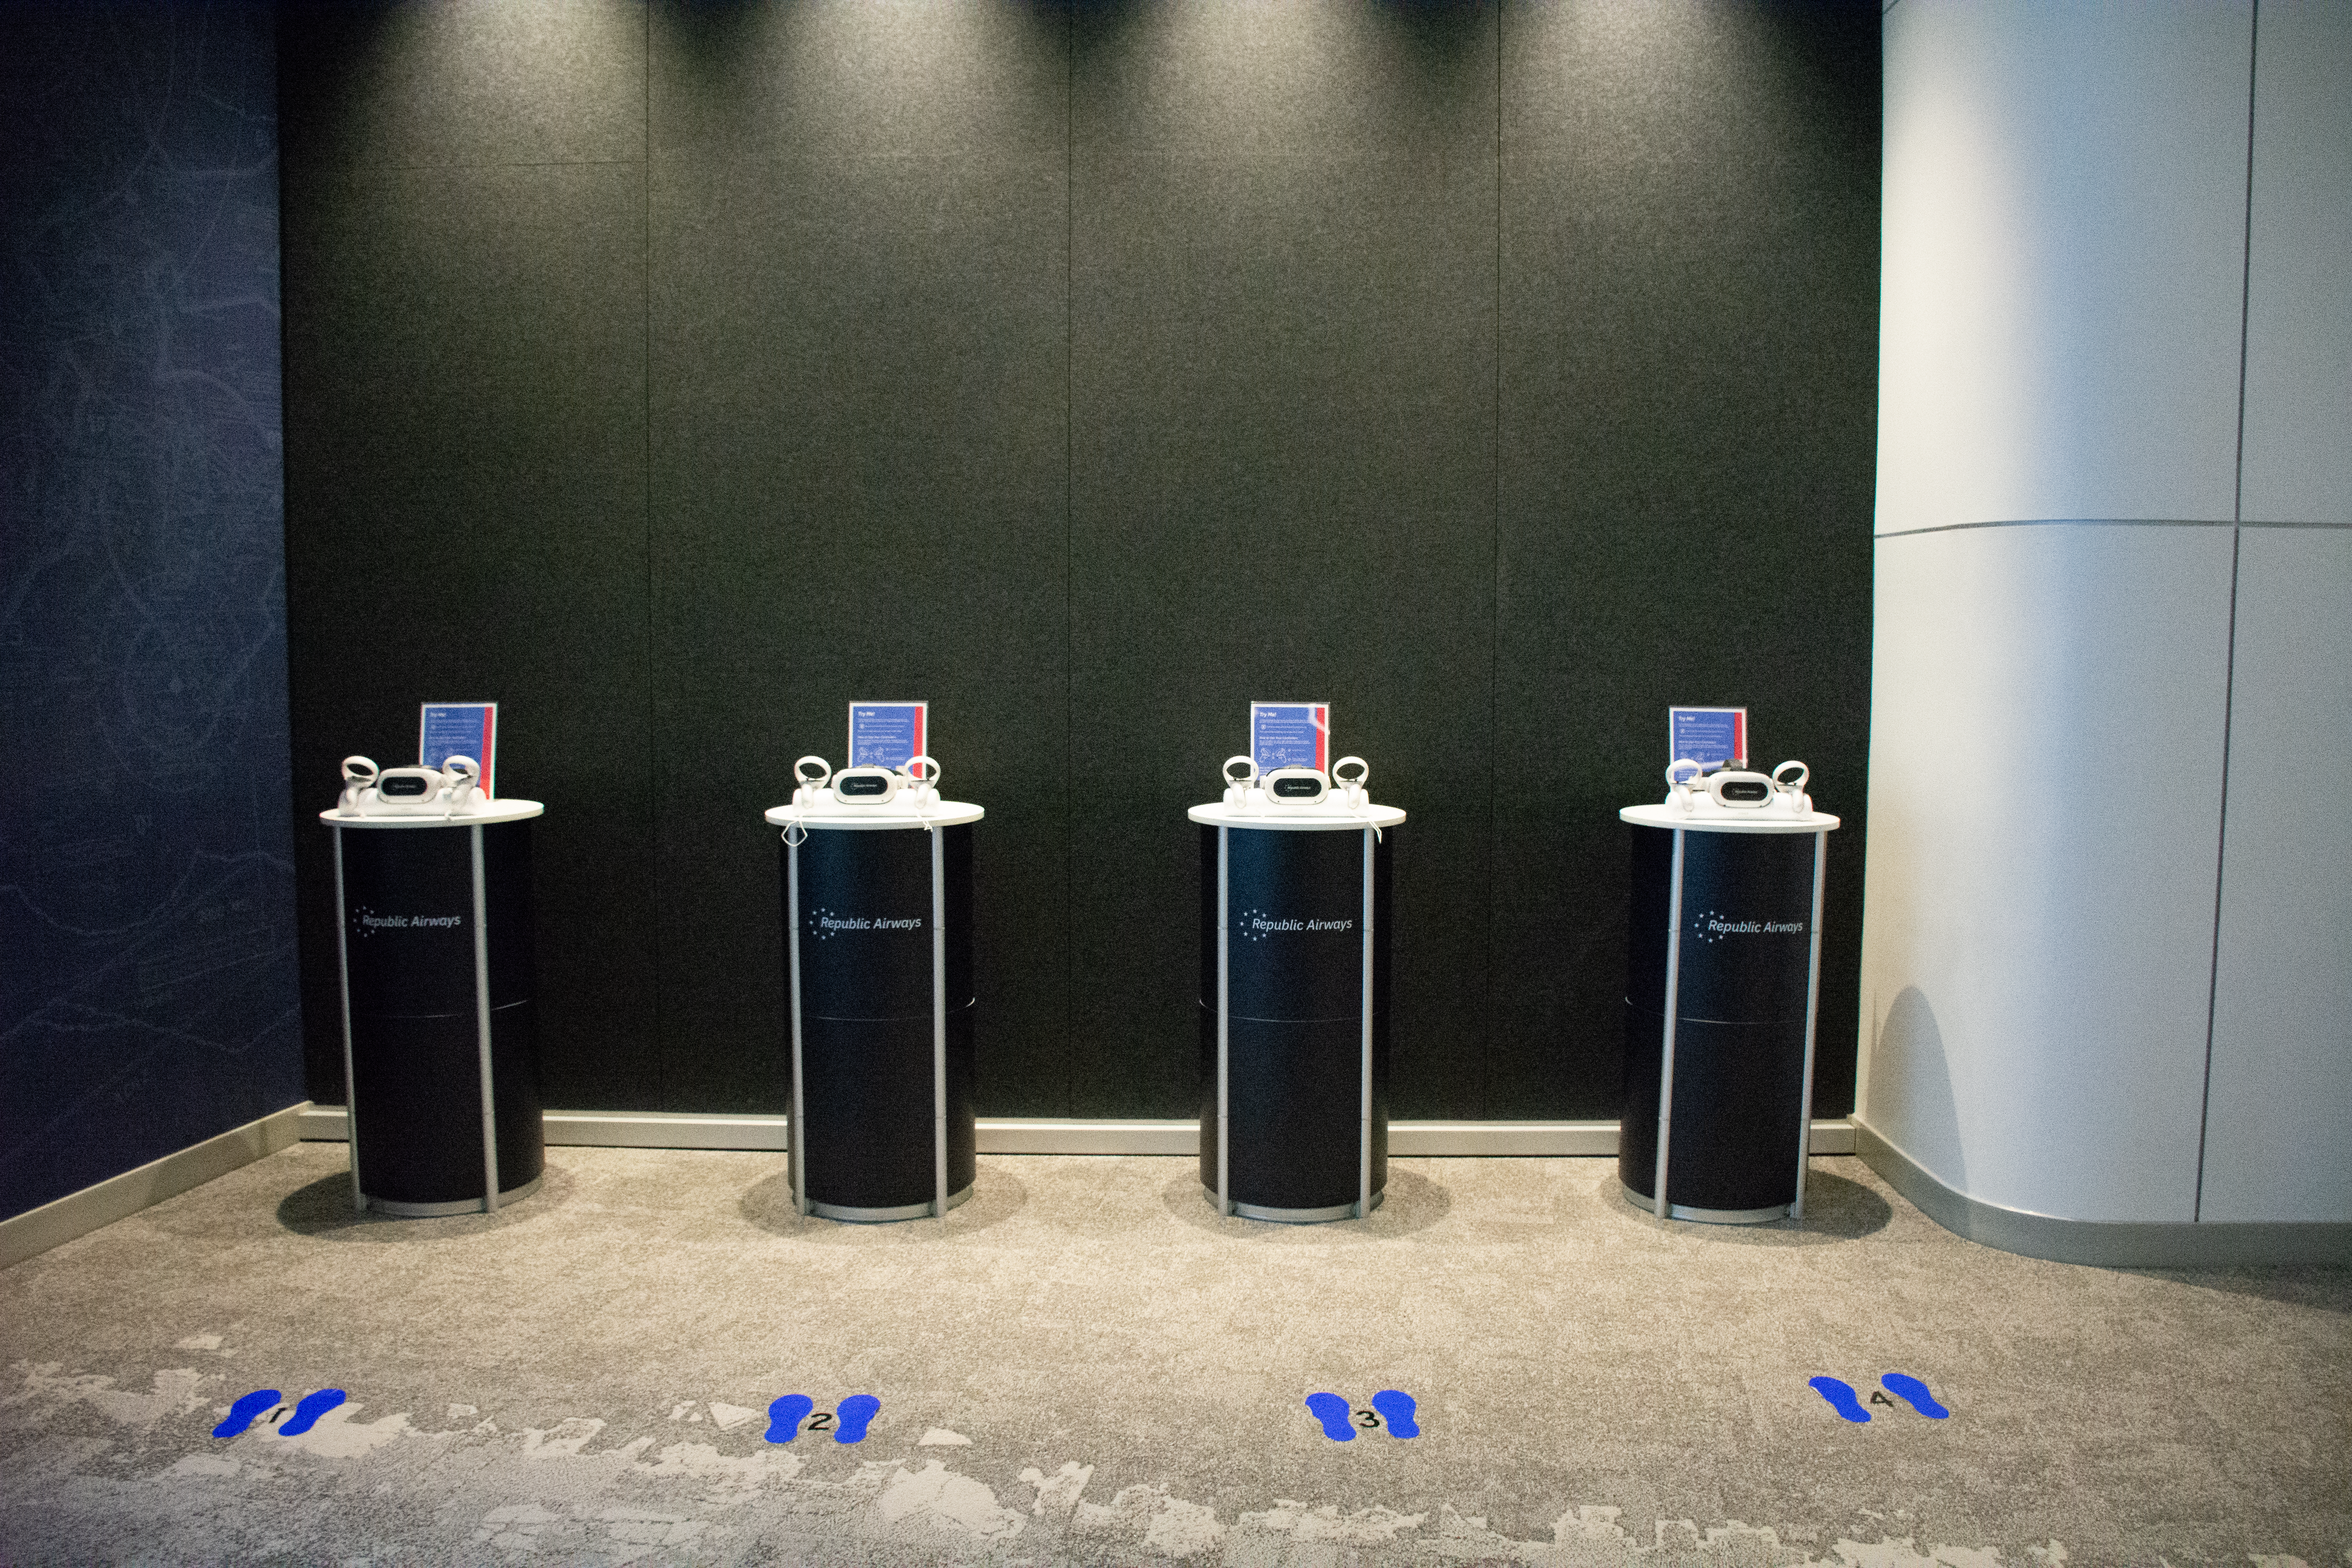 4 Republic Airways kiosks in a community room with VR headsets.